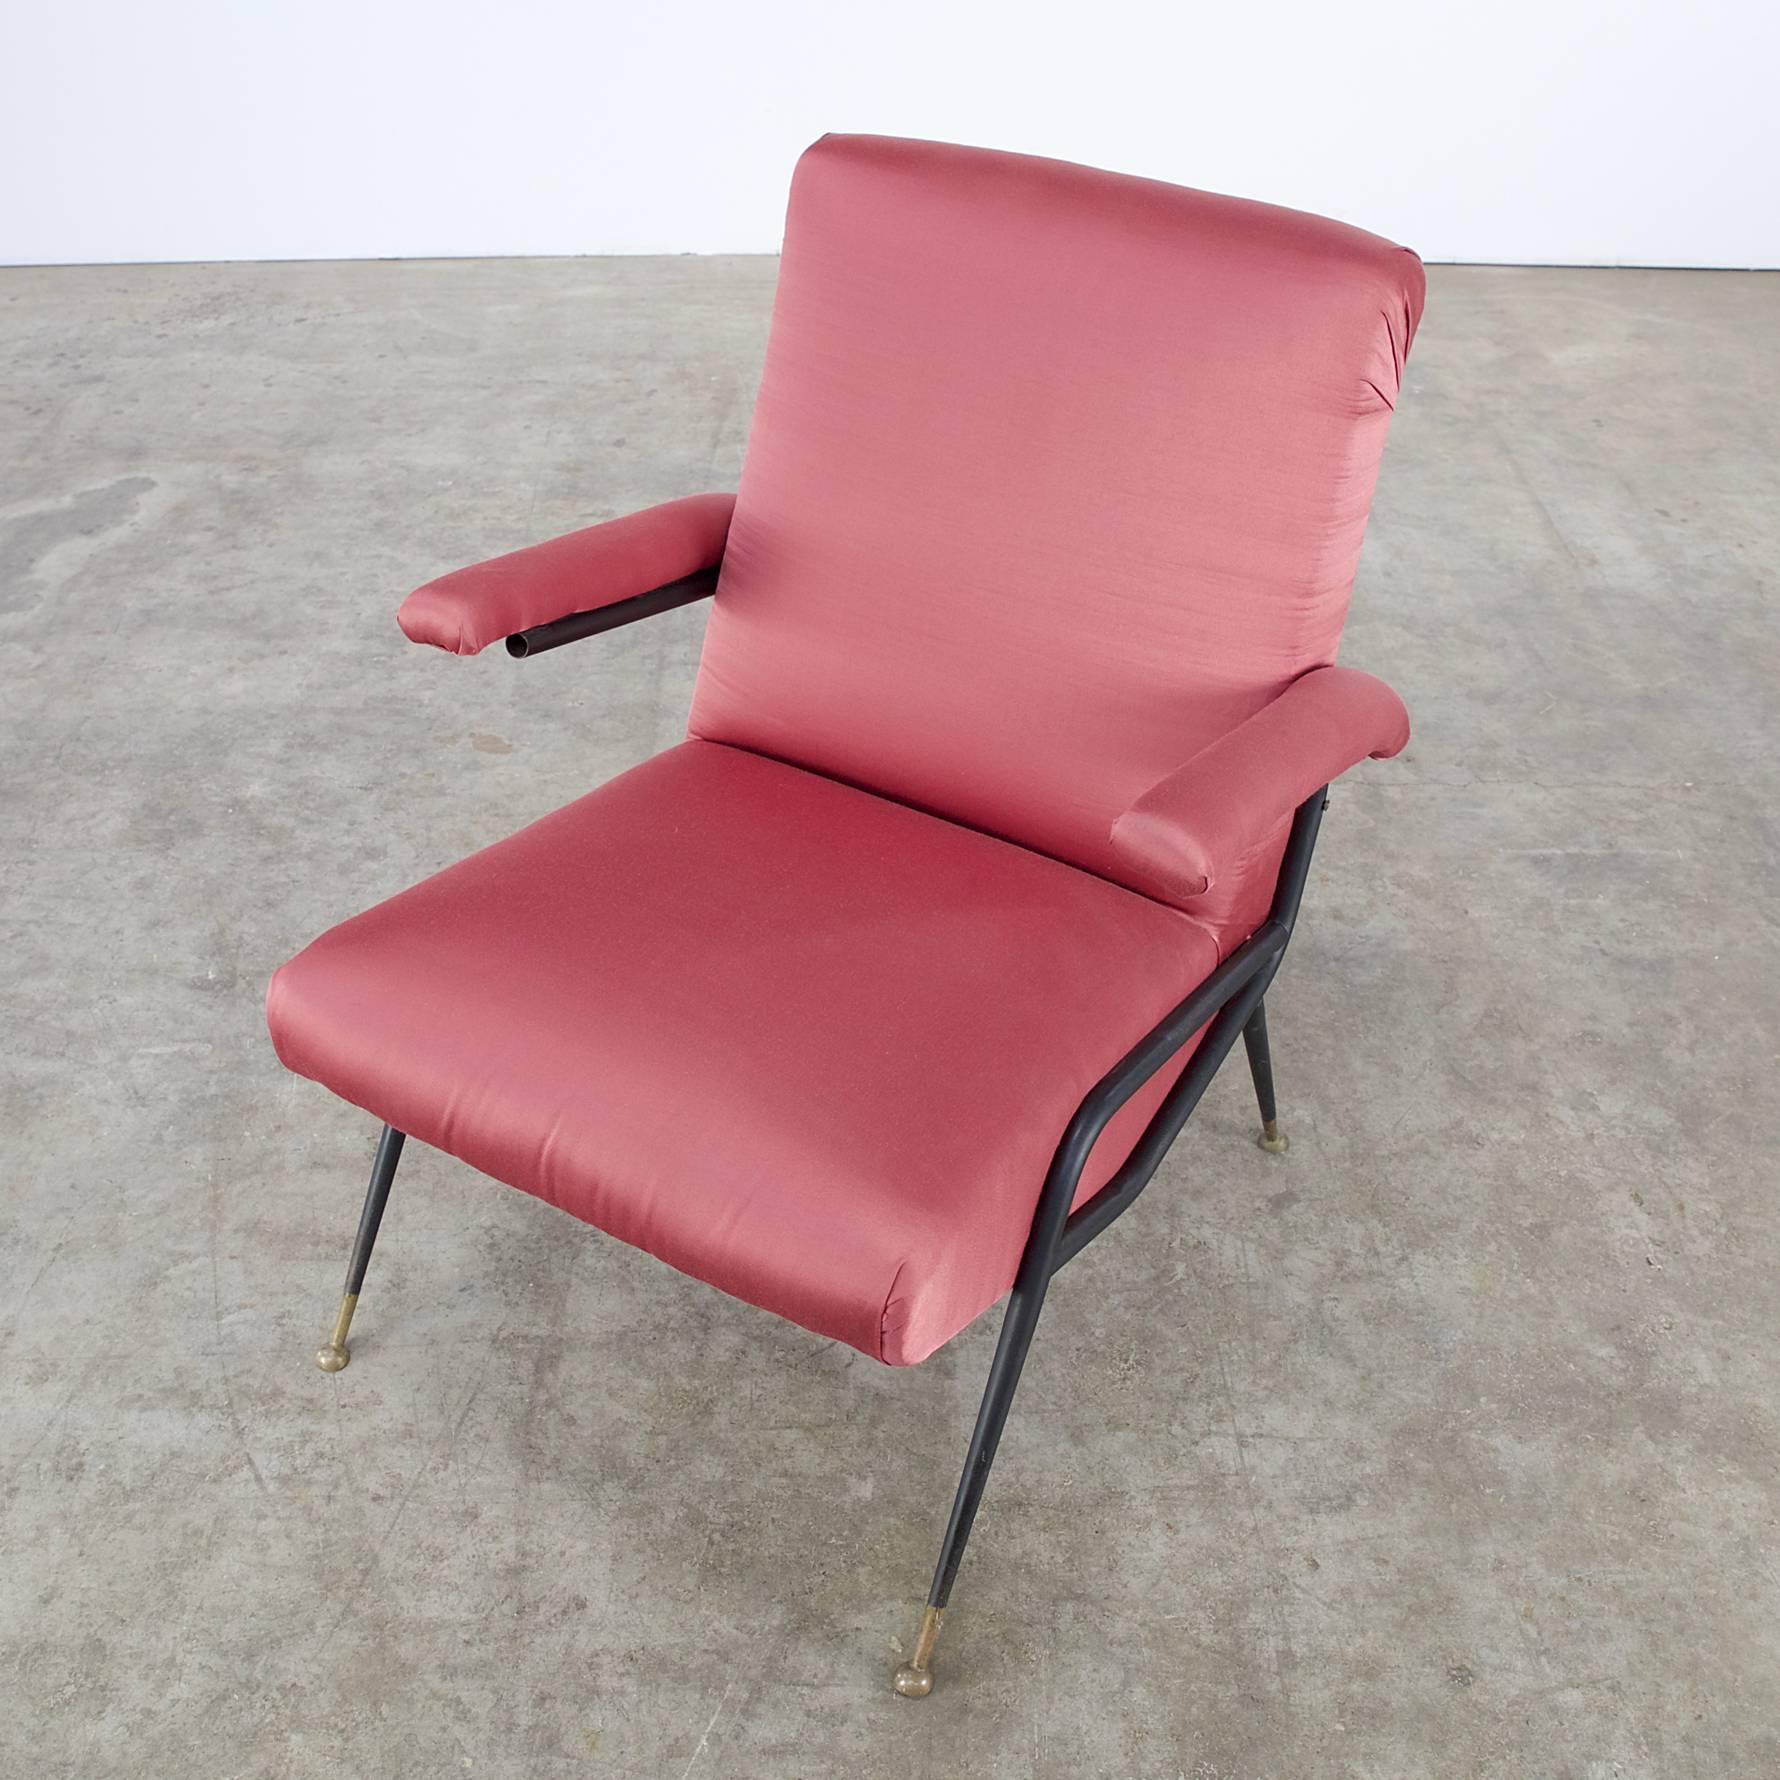 1960s Italian Design Chair in Old Red Fabric, Set of Two For Sale 3